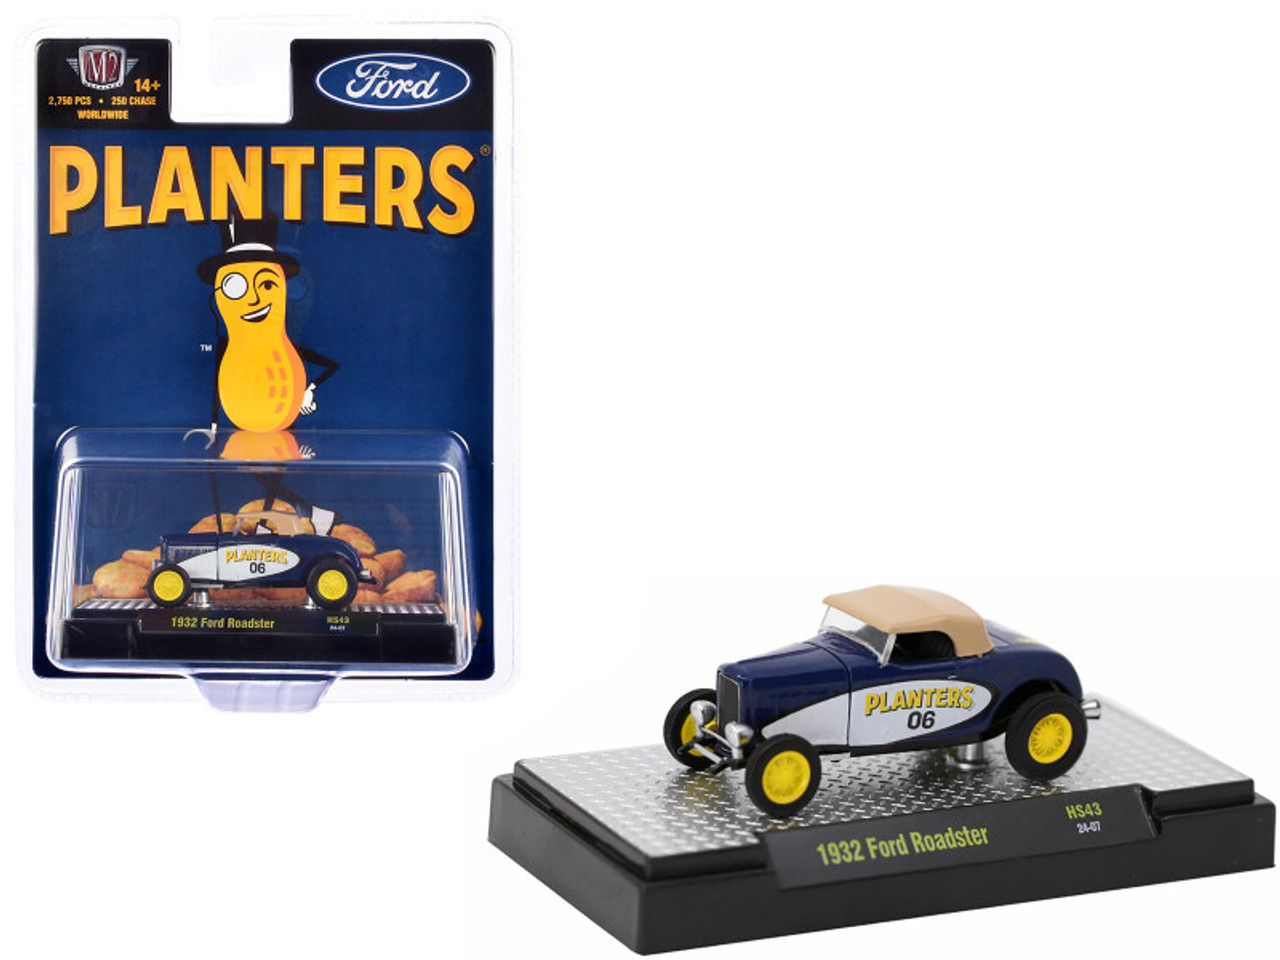 1932 Ford Roadster #06 Blue and White with Tan Soft Top "Planters Peanuts" Limited Edition to 2750 pieces Worldwide 1/64 Diecast Model Car by M2 Machines